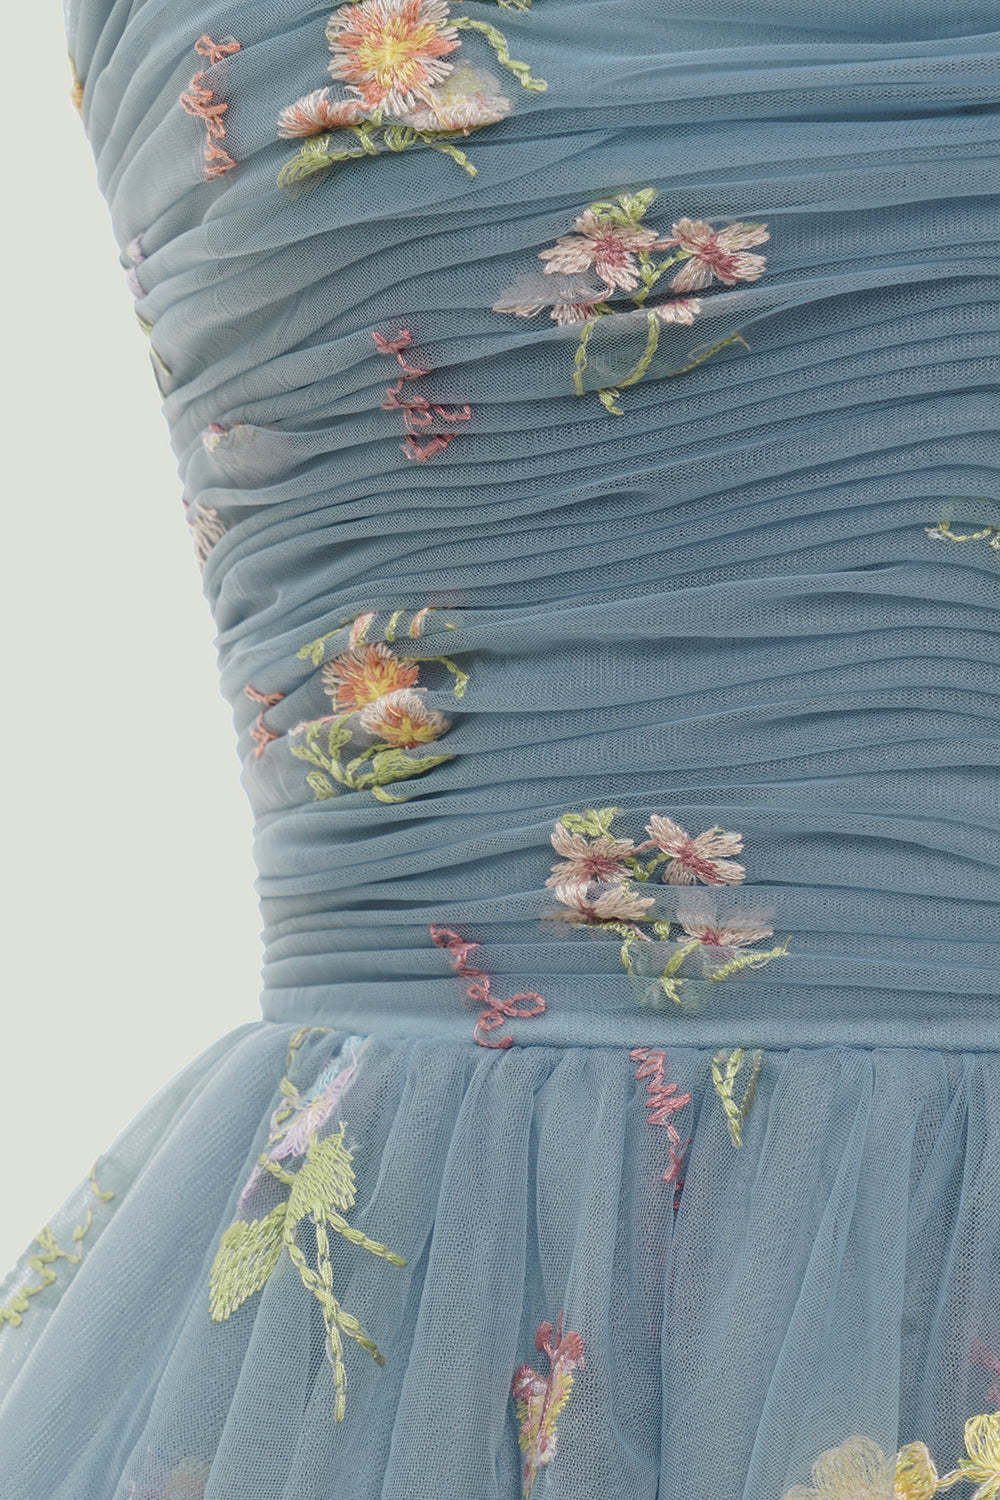 Grey Blue Spaghetti Straps Short Homecoming Dress with Embroidery